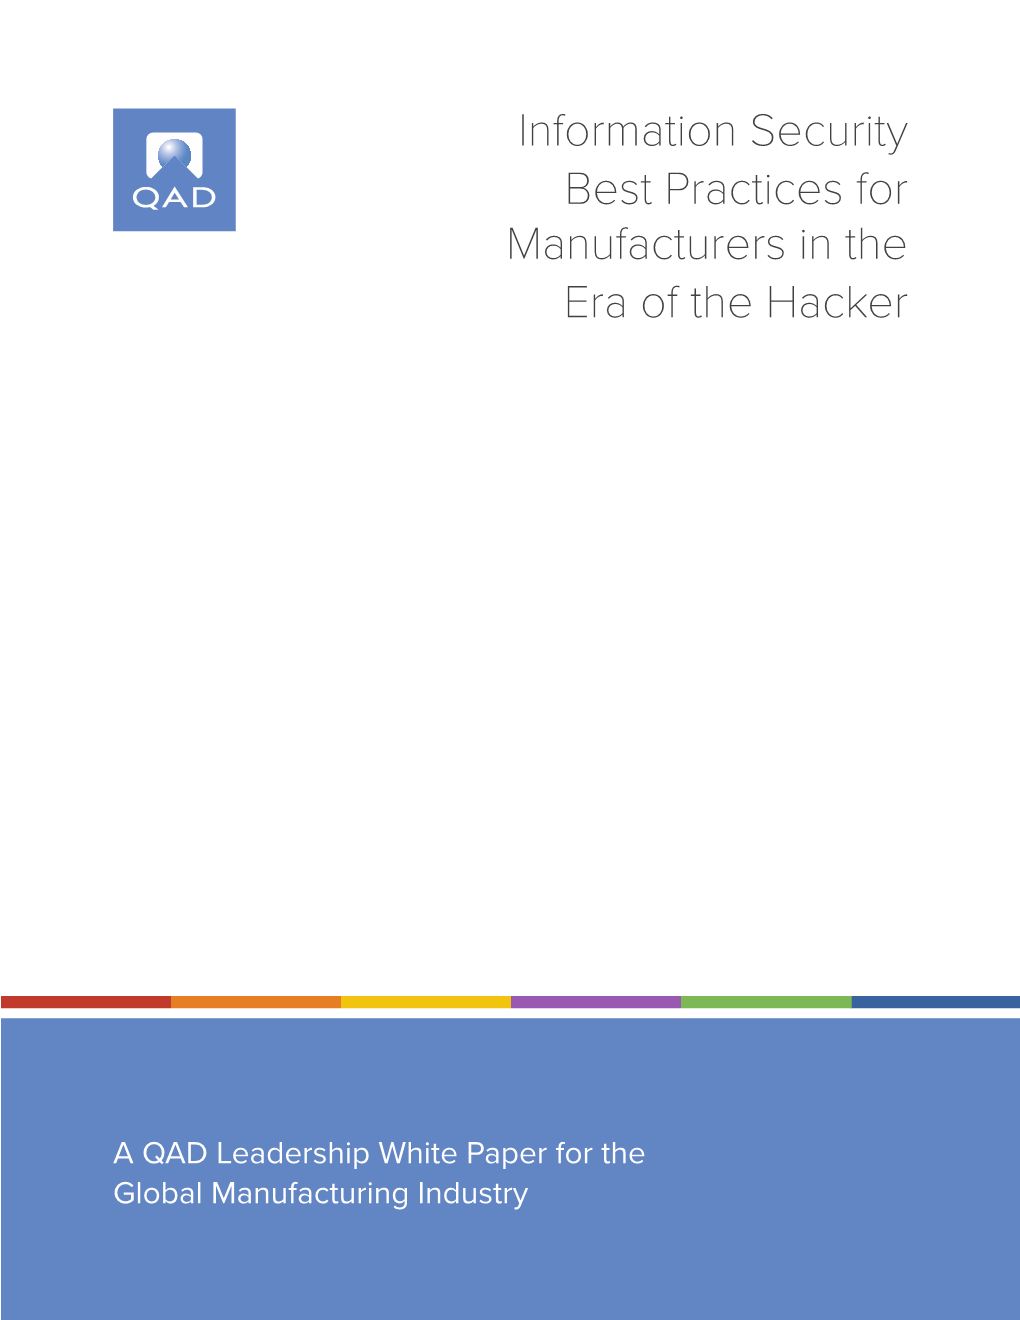 Information Security Best Practices for Manufacturers in the Era of the Hacker